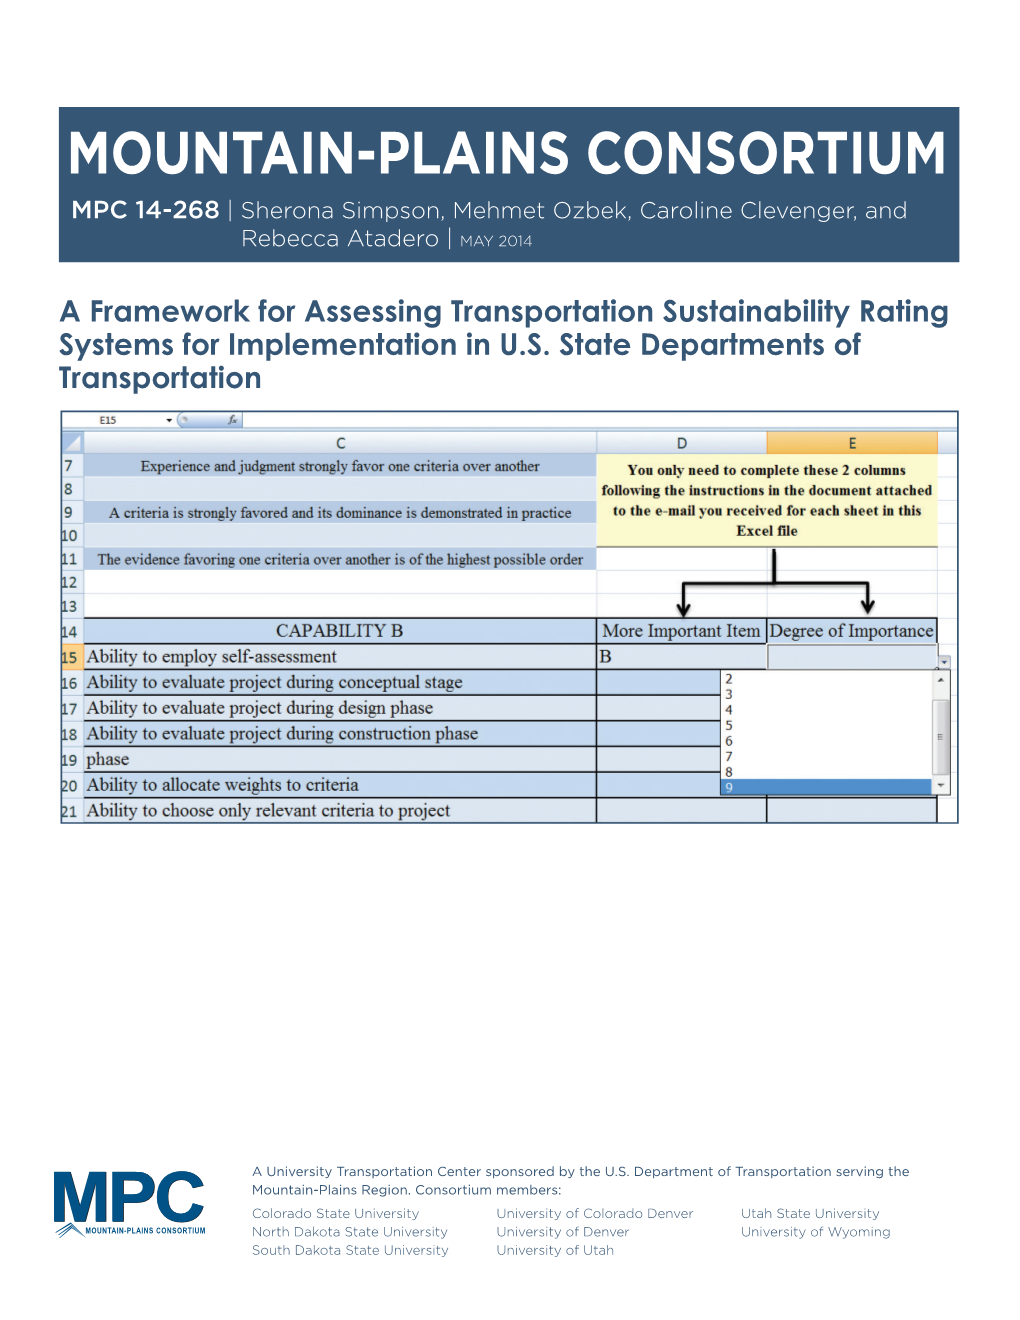 A Framework for Assessing Transportation Sustainability Rating Systems for Implementation in U.S